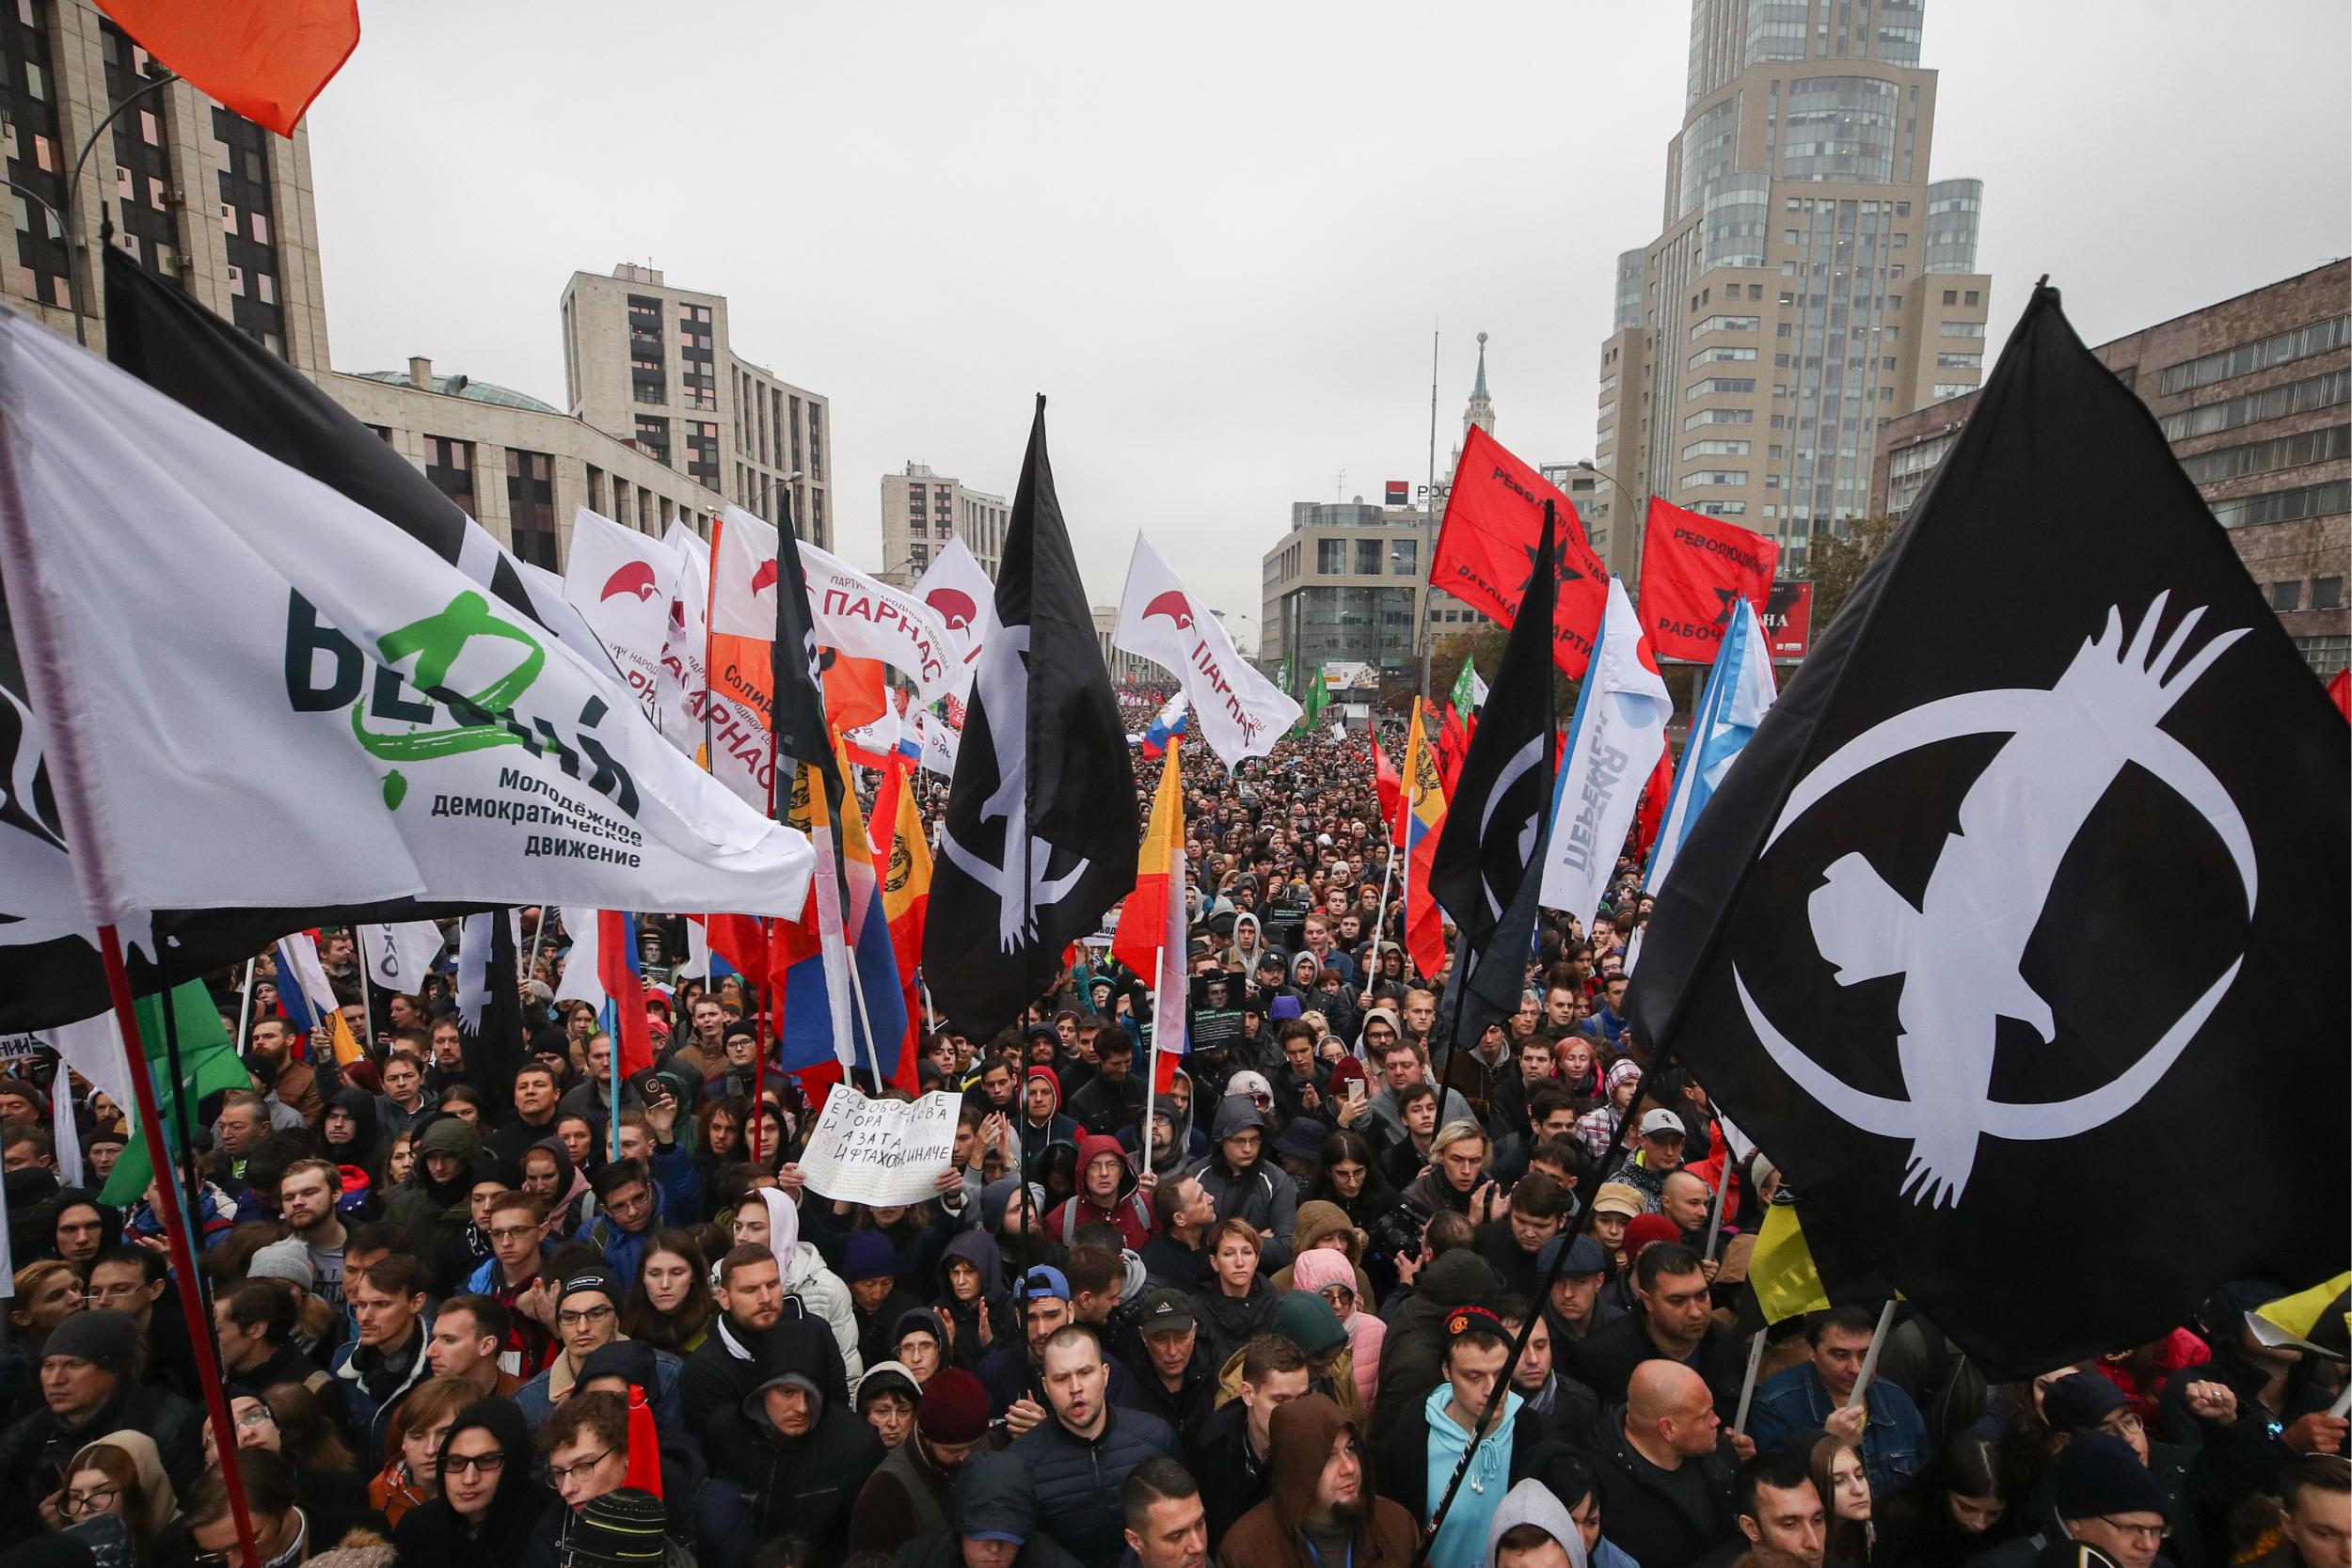 The rally in support of political prisoners saw thousands amass in Prospekt Sakharova Street.